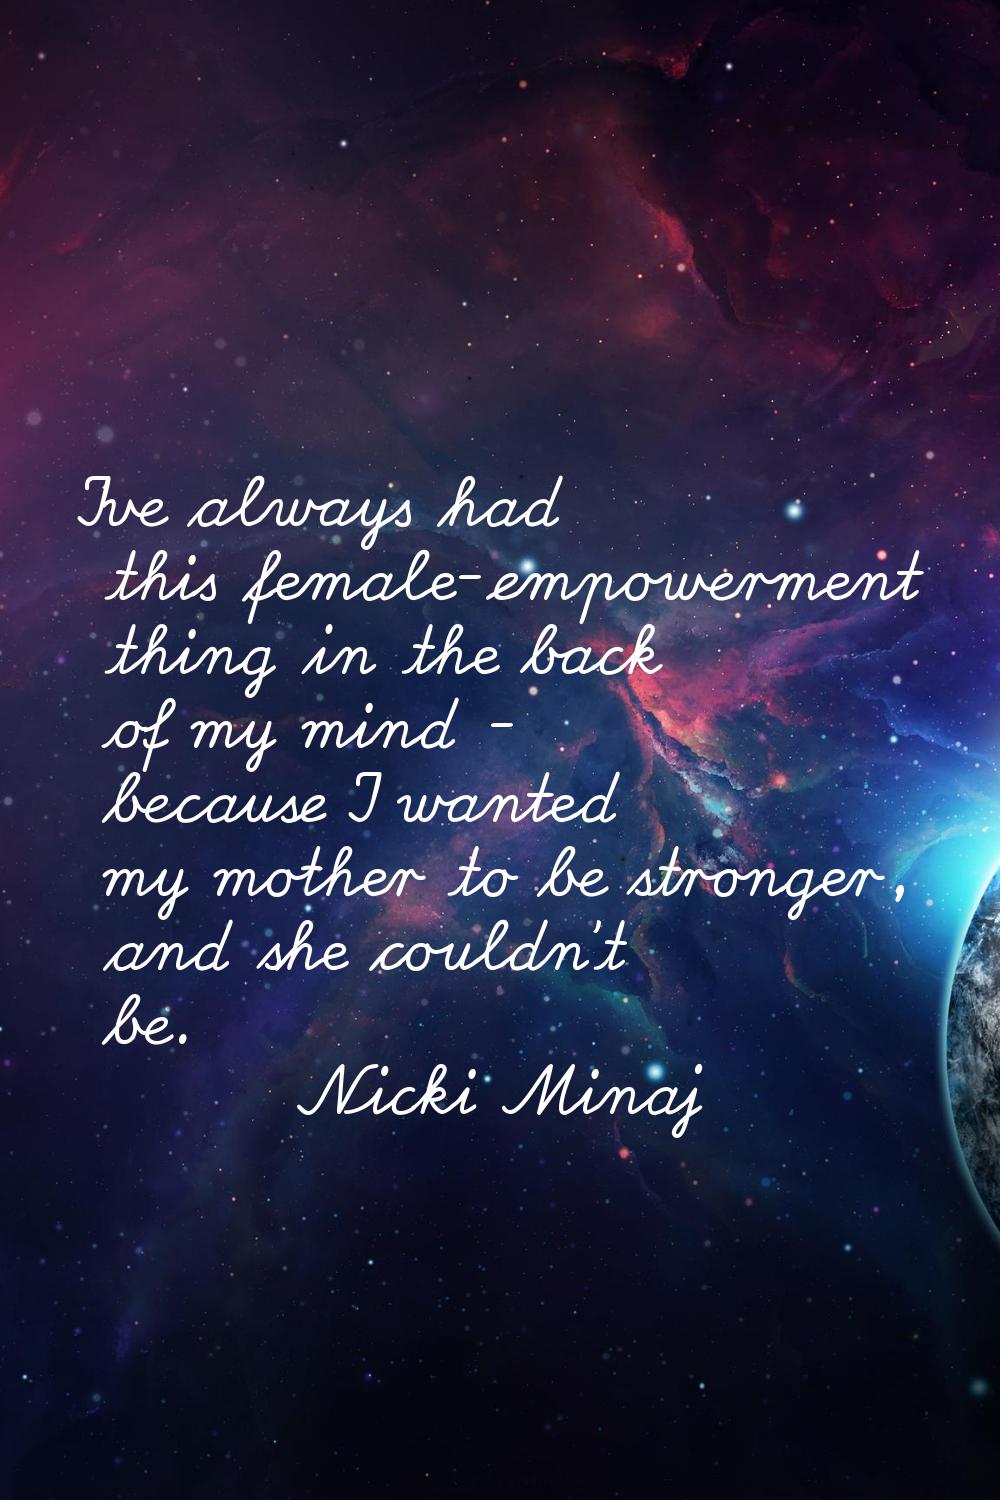 I've always had this female-empowerment thing in the back of my mind - because I wanted my mother t